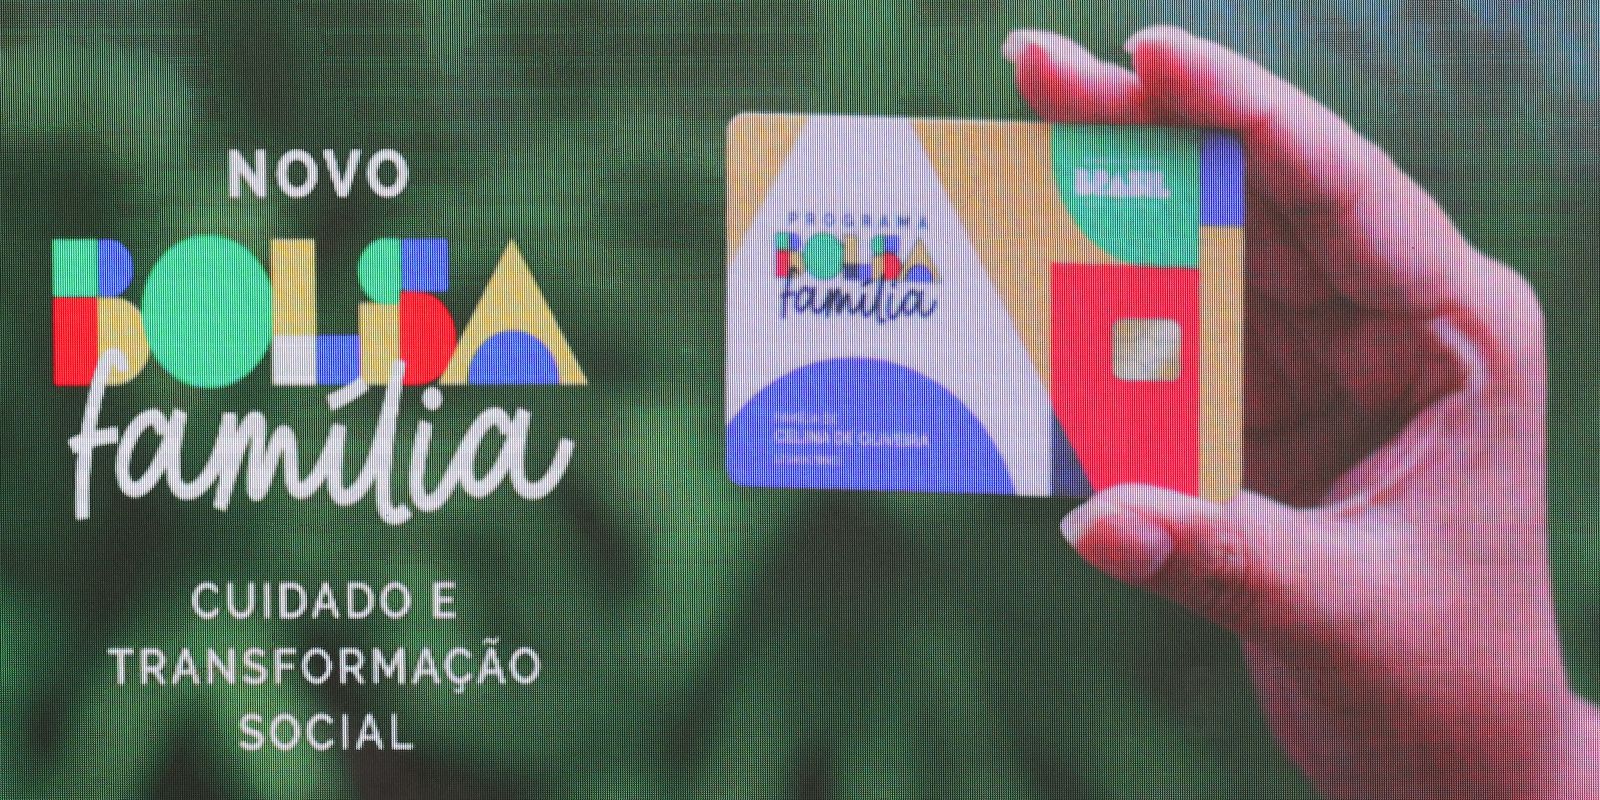 Beneficiaries with final NIS 9 receive new Bolsa Família